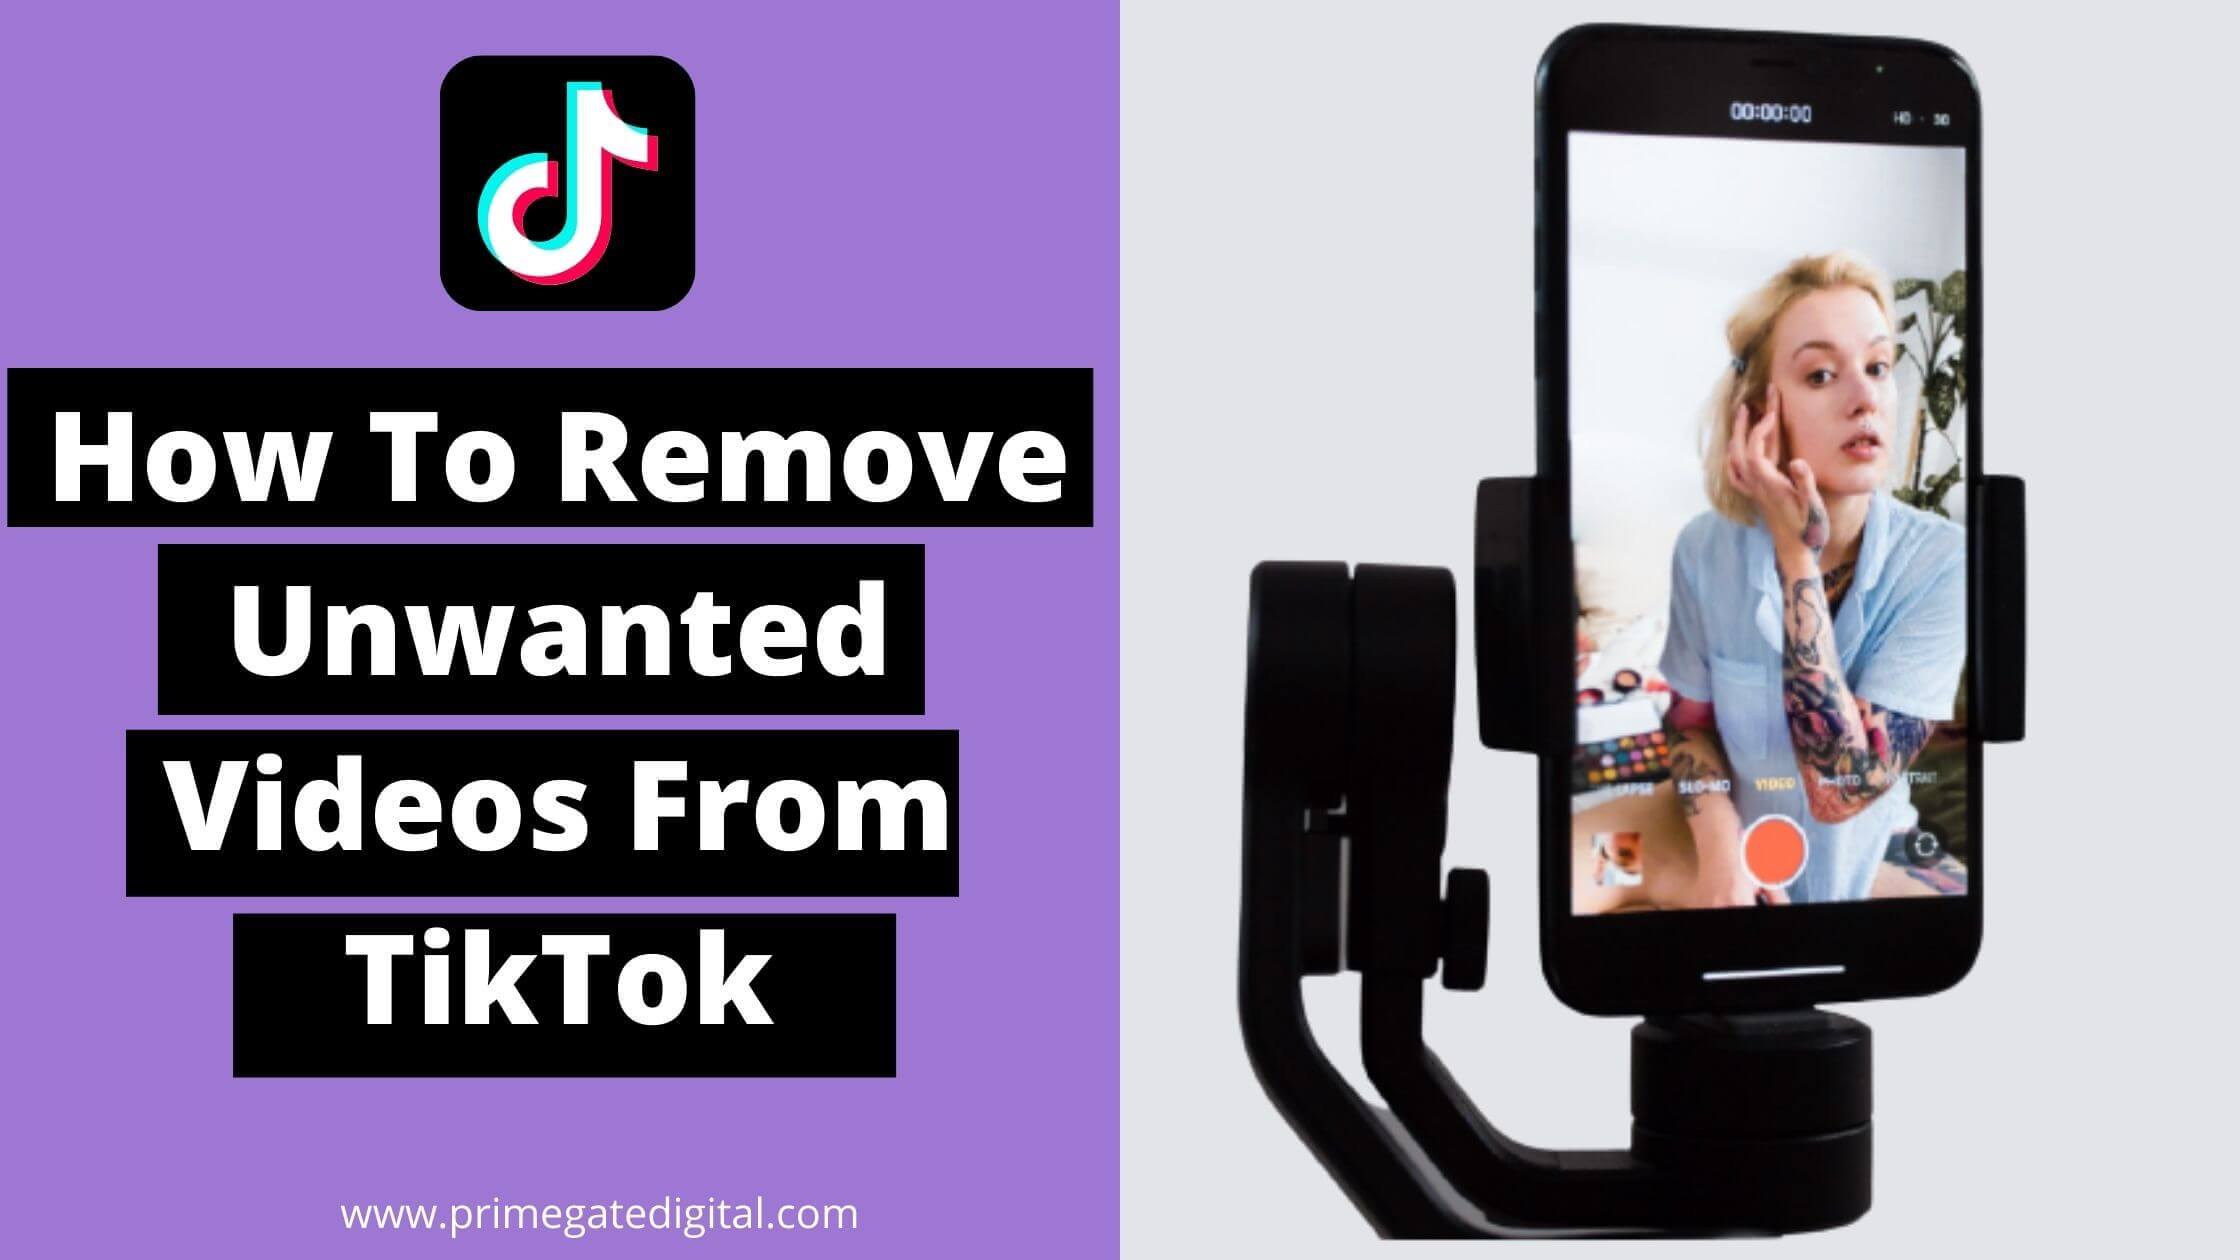 How To Remove Unwanted Videos From TikTok